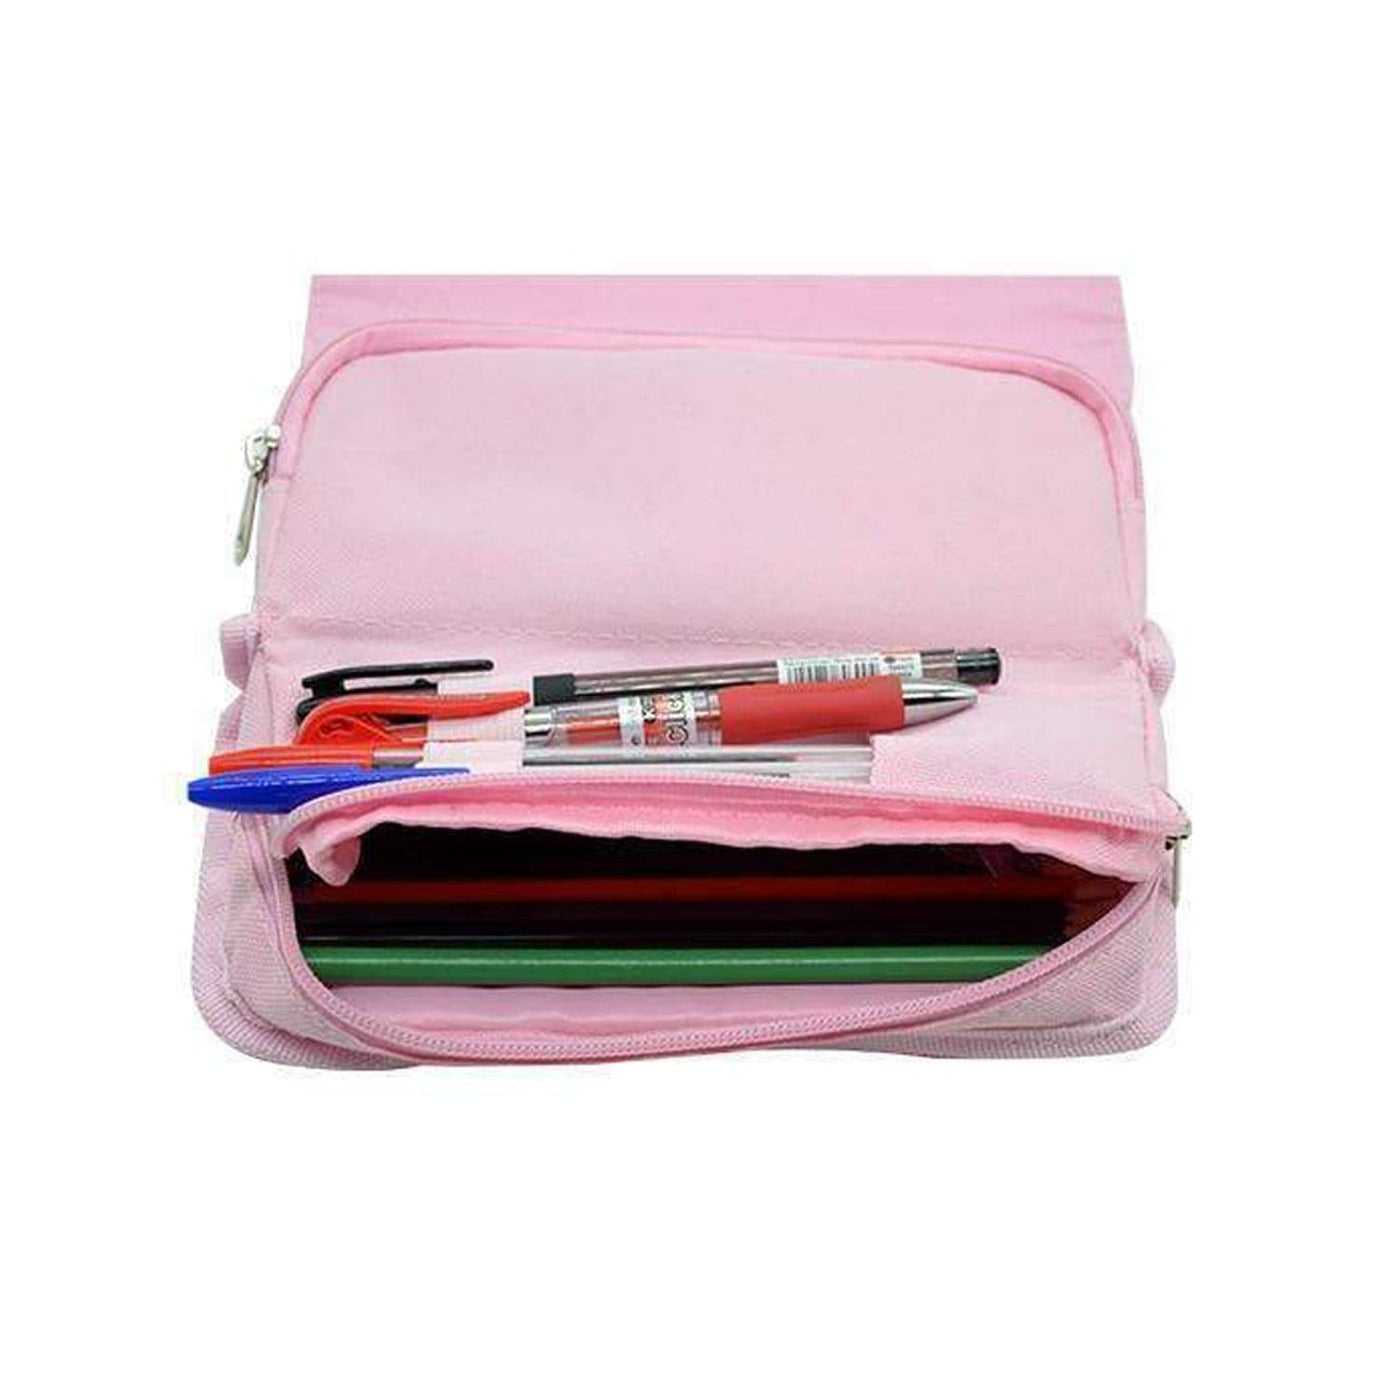 That's So Fetch - Christmas Mean Girls Pencil Case